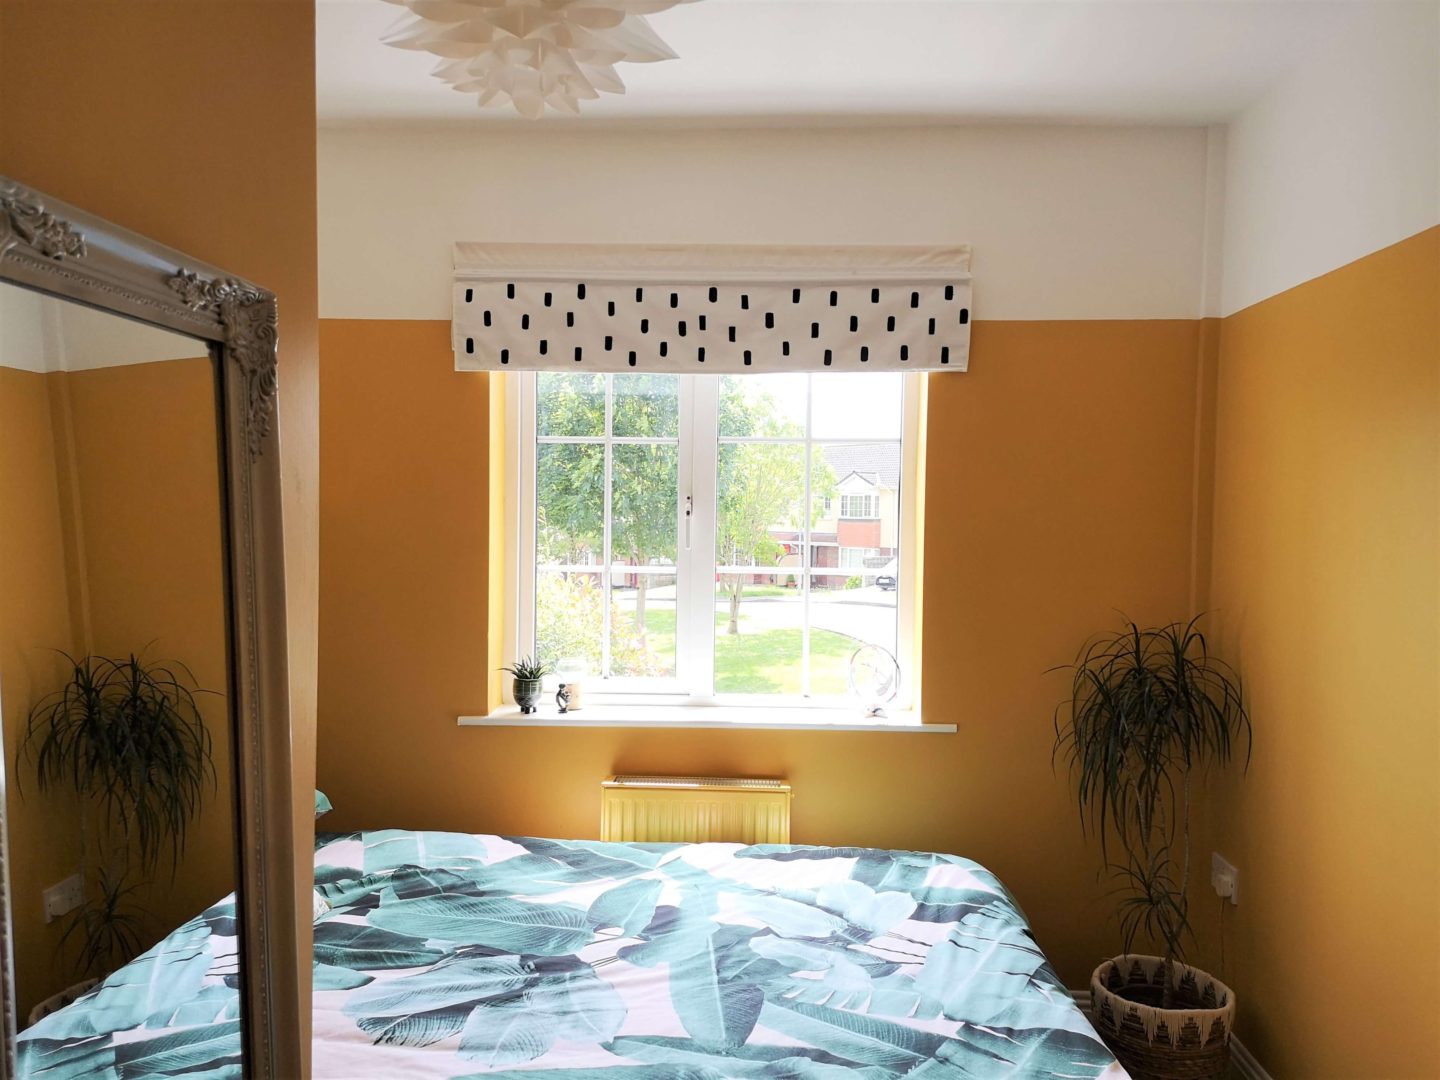 Mustard walls. White and black blind. Palm tree bedcovers. Silver full length mirror. 